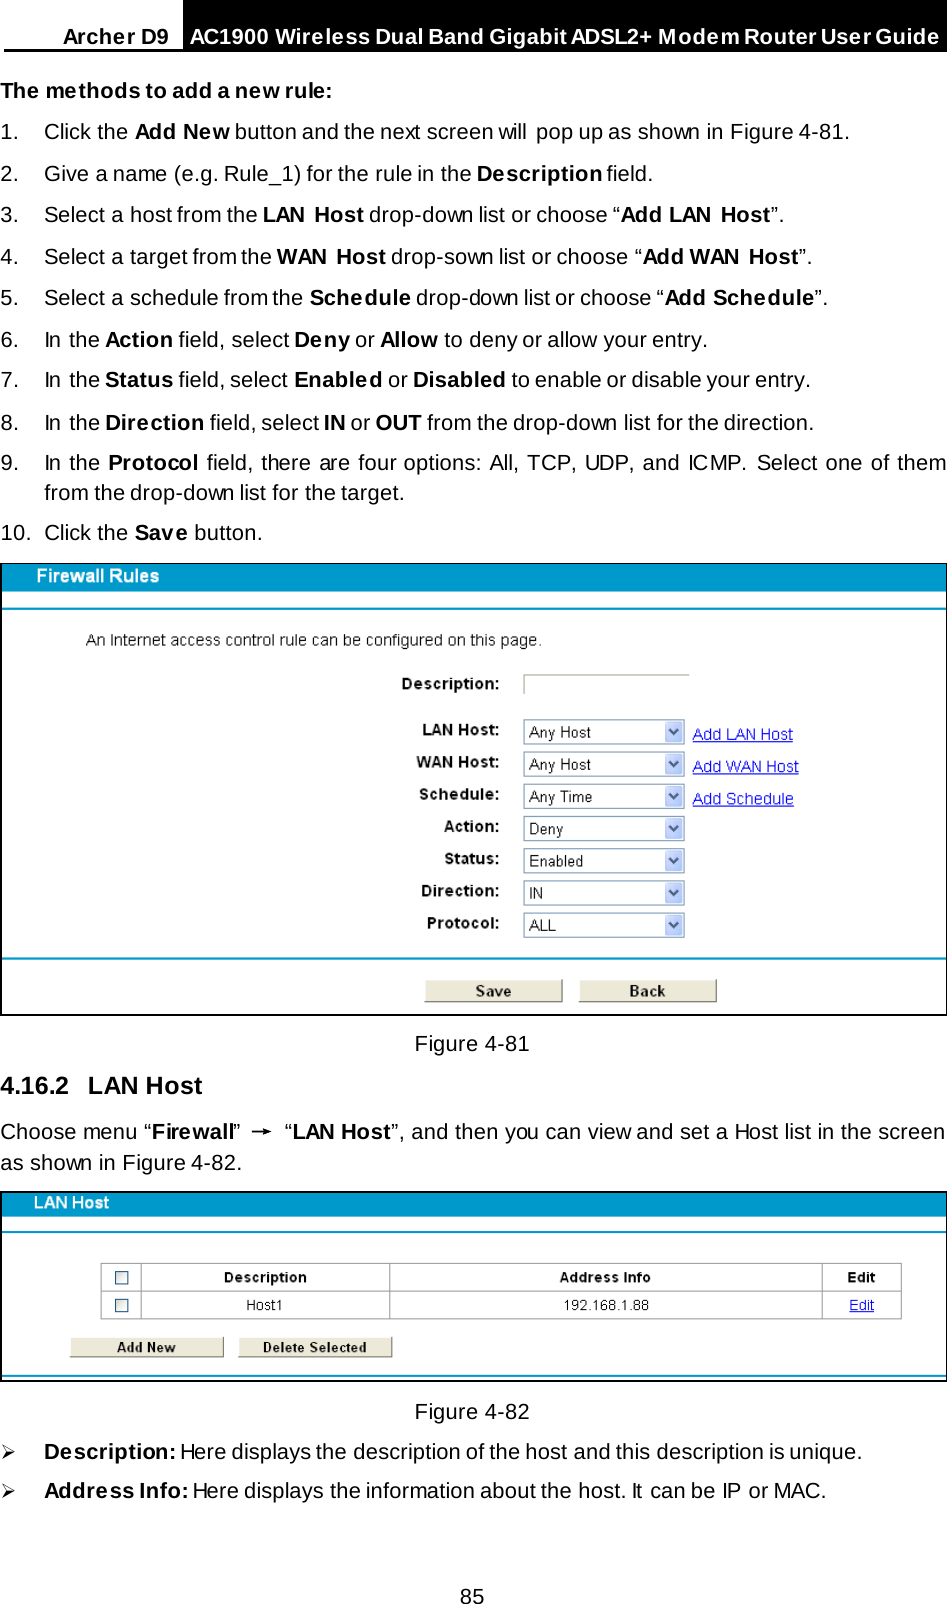 Arche r D9 AC1900 Wireless Dual Band Gigabit ADSL2+ Modem Router User Guide  The methods to add a new rule: 1.  Click the Add New button and the next screen will  pop up as shown in Figure 4-81. 2. Give a name (e.g. Rule_1) for the rule in the Description field. 3. Select a host from the LAN Host drop-down list or choose “Add LAN Host”. 4. Select a target from the WAN Host drop-sown list or choose “Add WAN Host”. 5. Select a schedule from the Schedule drop-down list or choose “Add Schedule”. 6. In the Action field, select Deny or Allow to deny or allow your entry. 7. In the Status field, select Enabled or Disabled to enable or disable your entry. 8. In the Direction field, select IN or OUT from the drop-down list for the direction. 9. In the Protocol field, there are four options: All, TCP, UDP, and ICMP. Select one of them from the drop-down list for the target. 10. Click the Save button.  Figure 4-81   4.16.2 LAN Host Choose menu “Firewall” → “LAN Host”, and then you can view and set a Host list in the screen as shown in Figure 4-82.   Figure 4-82  Description: Here displays the description of the host and this description is unique.    Address Info: Here displays the information about the host. It can be IP or MAC.   85 